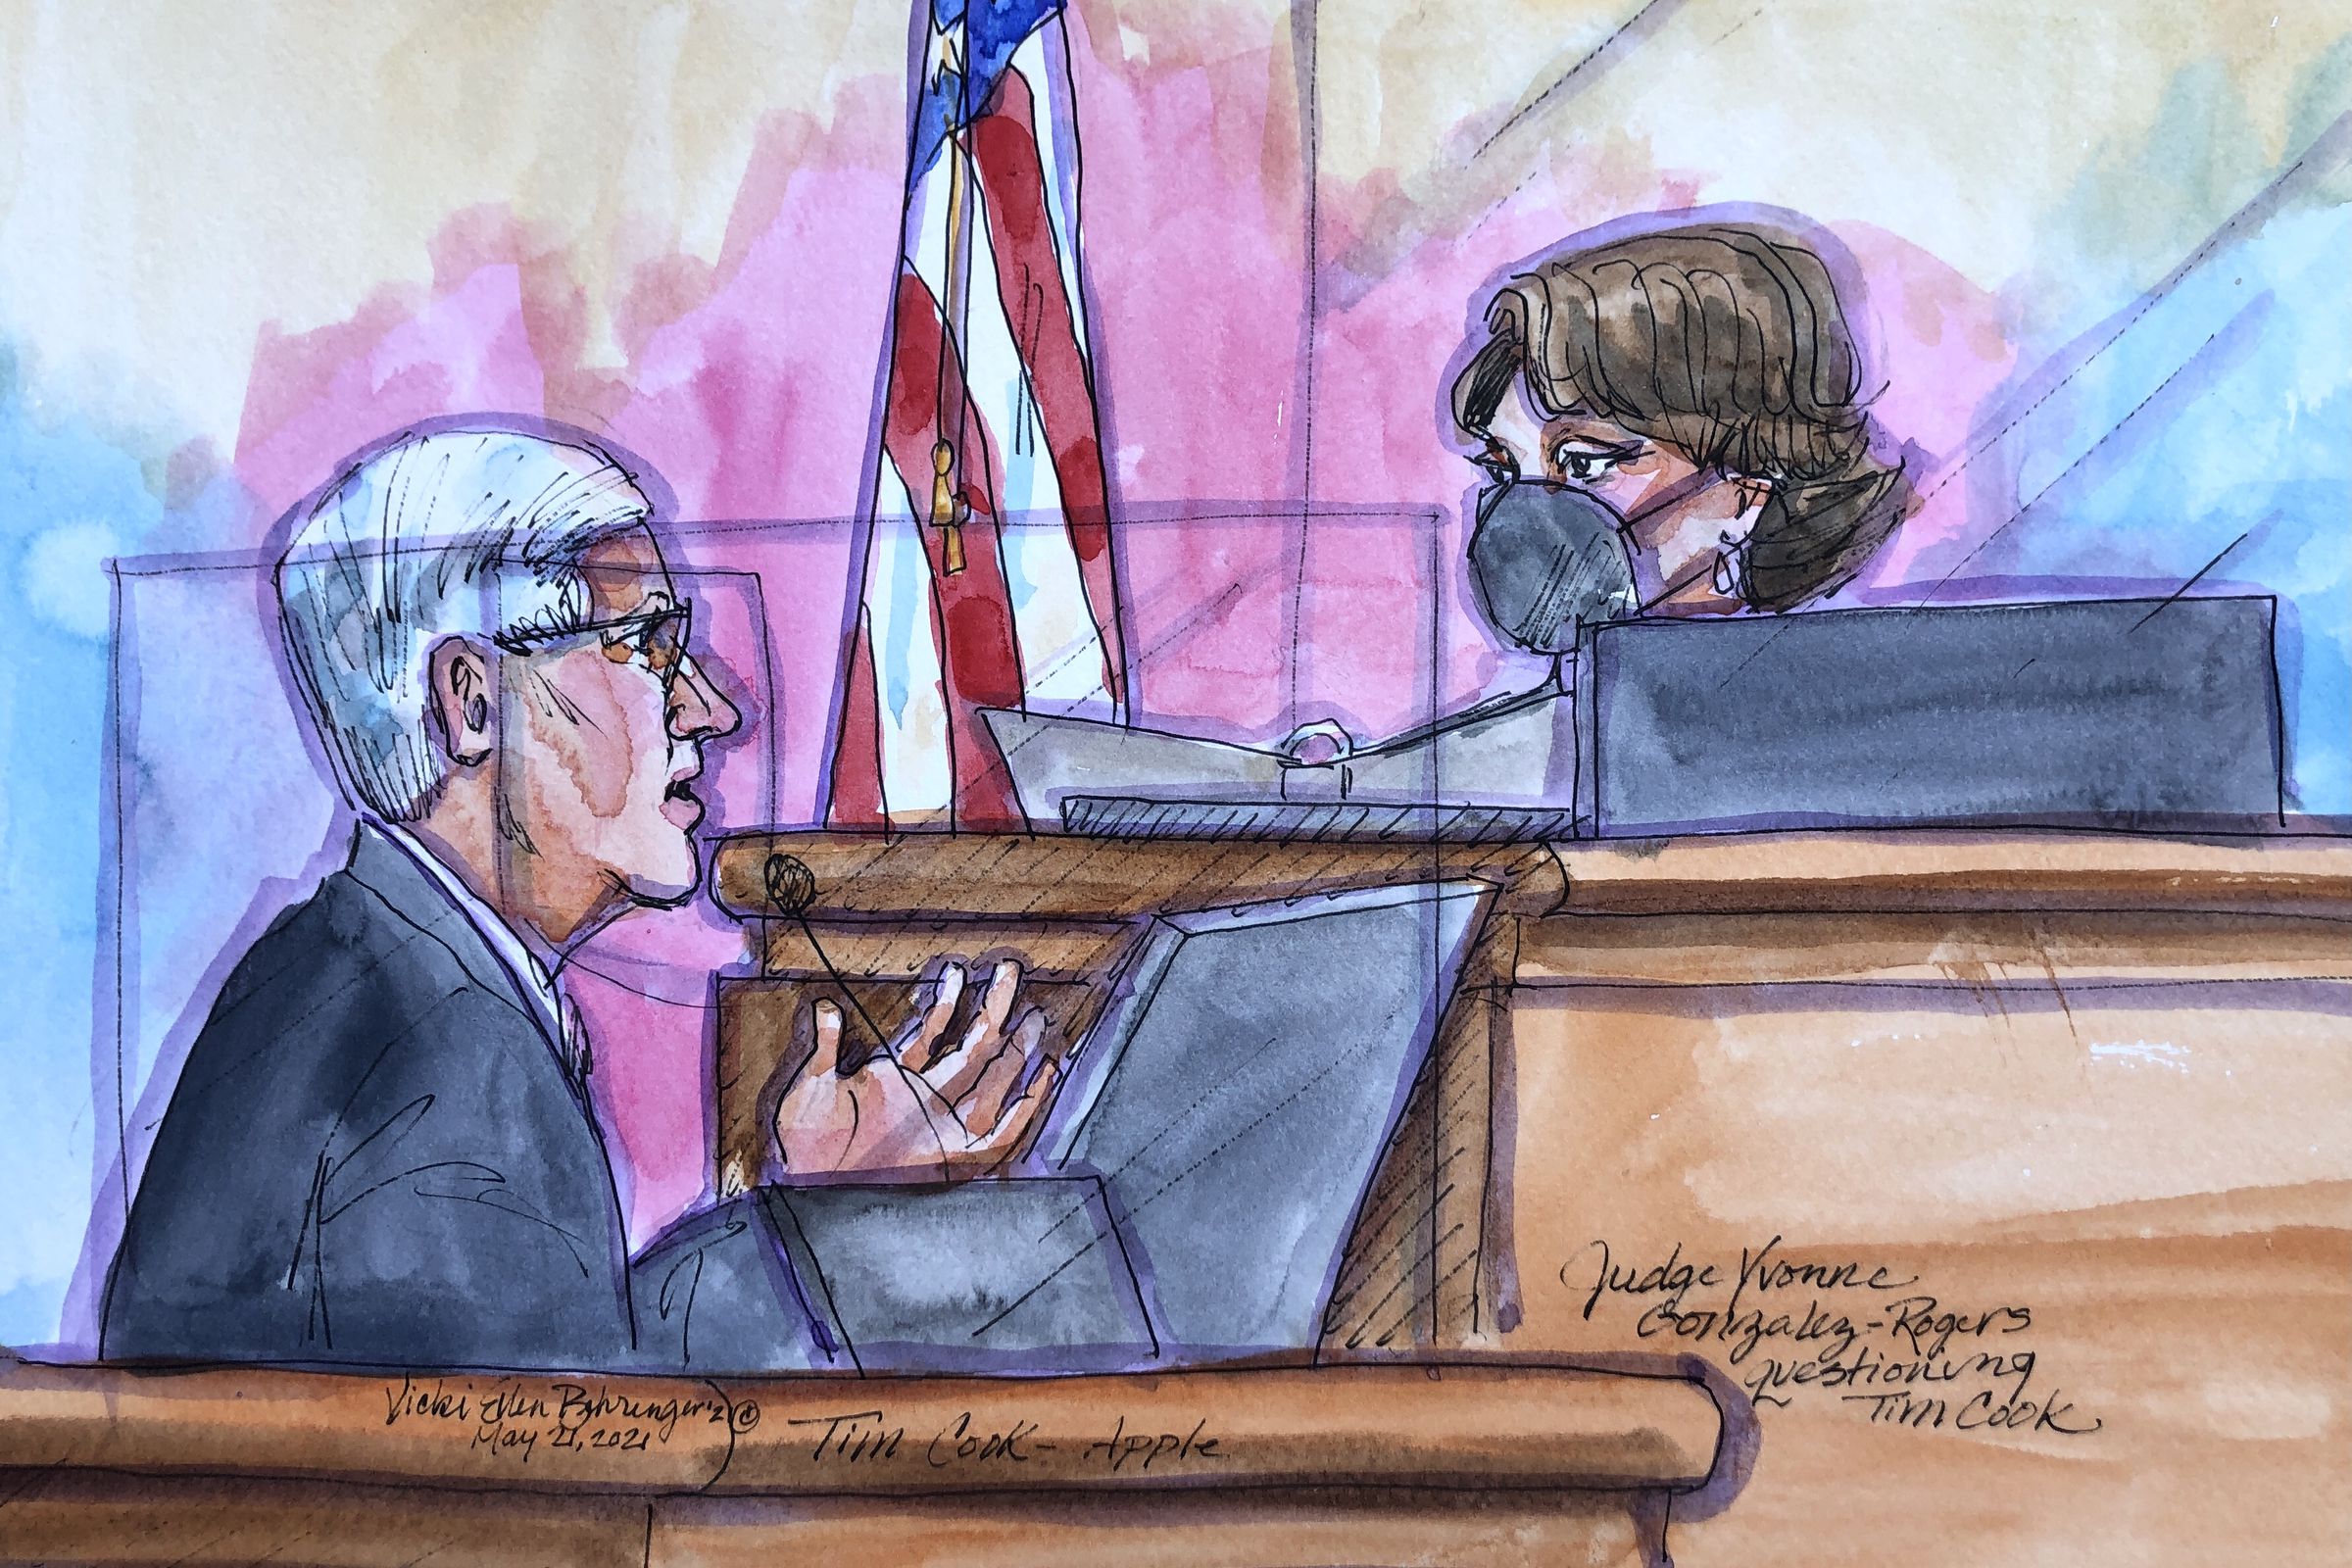 Tim Cook gestures evocatively towards Judge Yvonne Gonzales Rogers